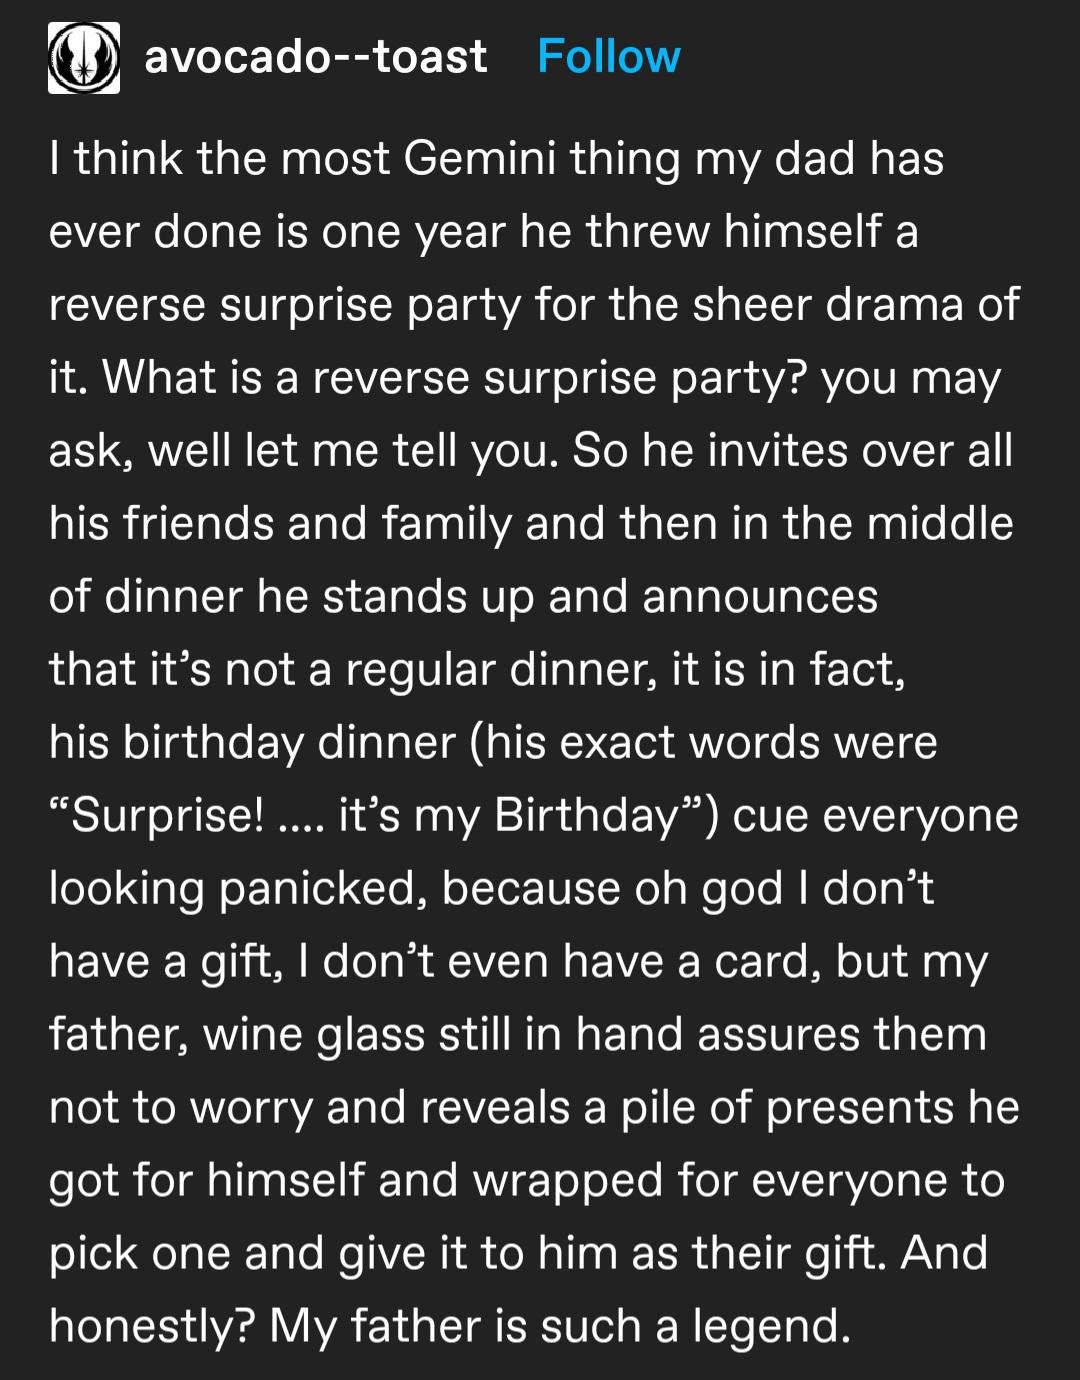 awesome pics and memes - angle - avocadotoast I think the most Gemini thing my dad has ever done is one year he threw himself a reverse surprise party for the sheer drama of it. What is a reverse surprise party? you may ask, well let me tell you. So he in